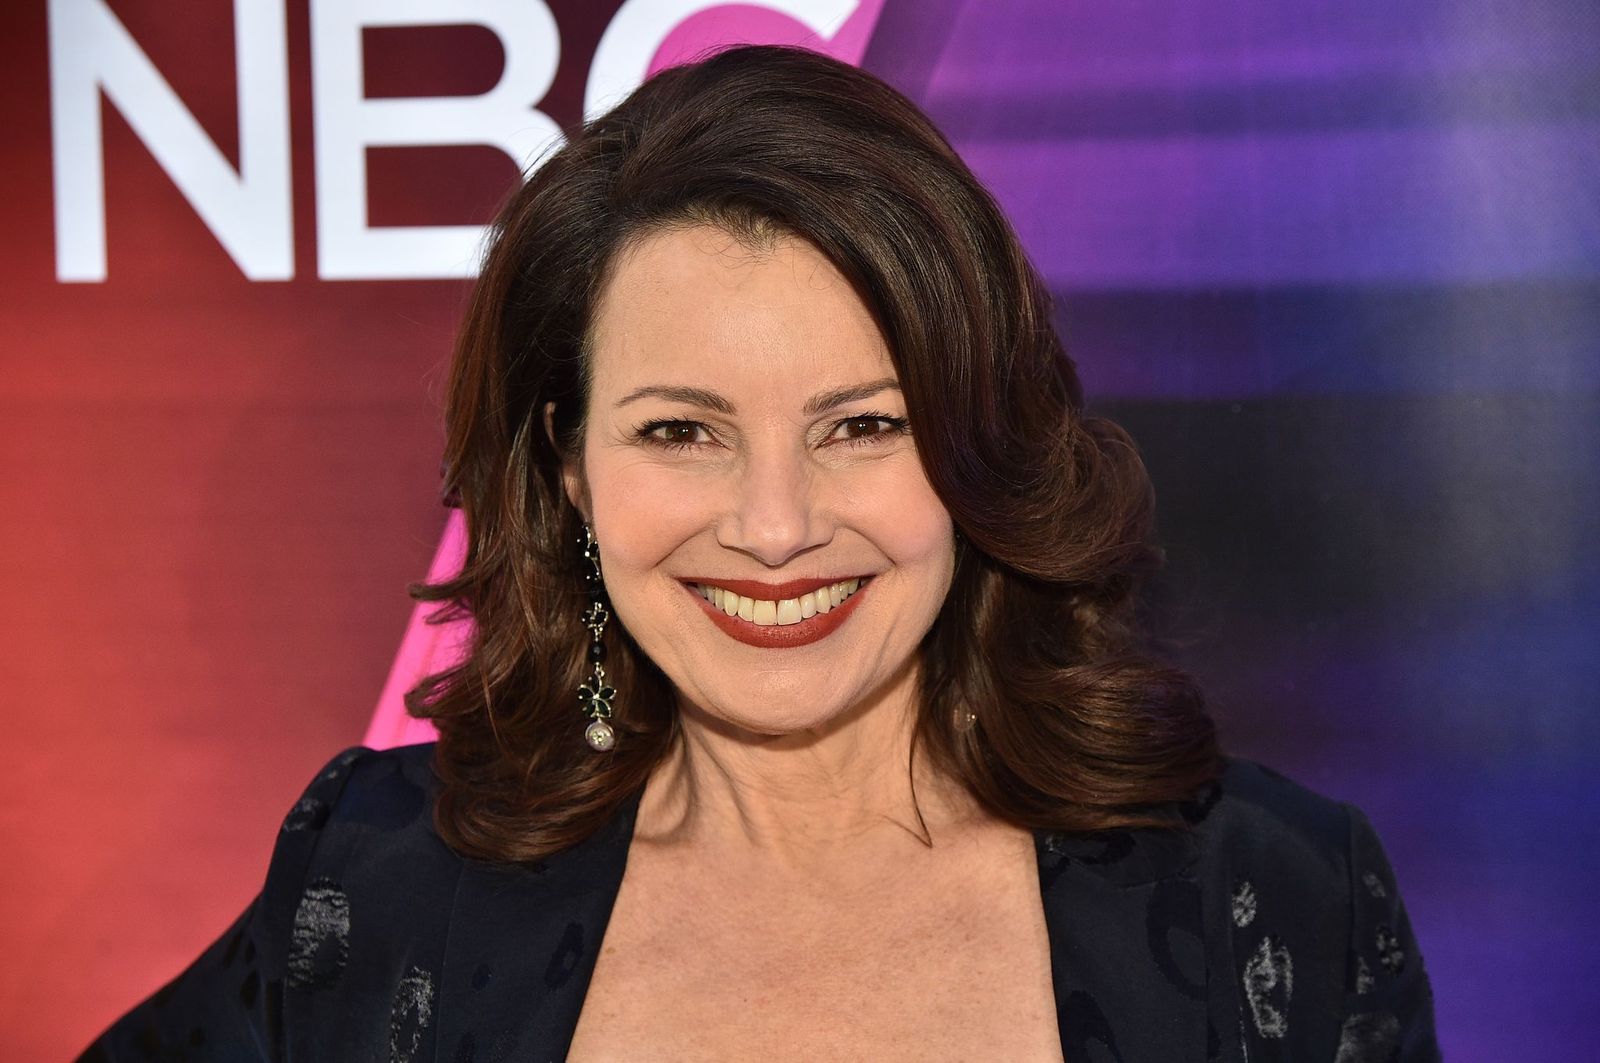 Fran Drescher from "Indebted" at the NBC Midseason New York Press Junket at Four Seasons Hotel New York on January 23, 2020 | Photo: Getty Images